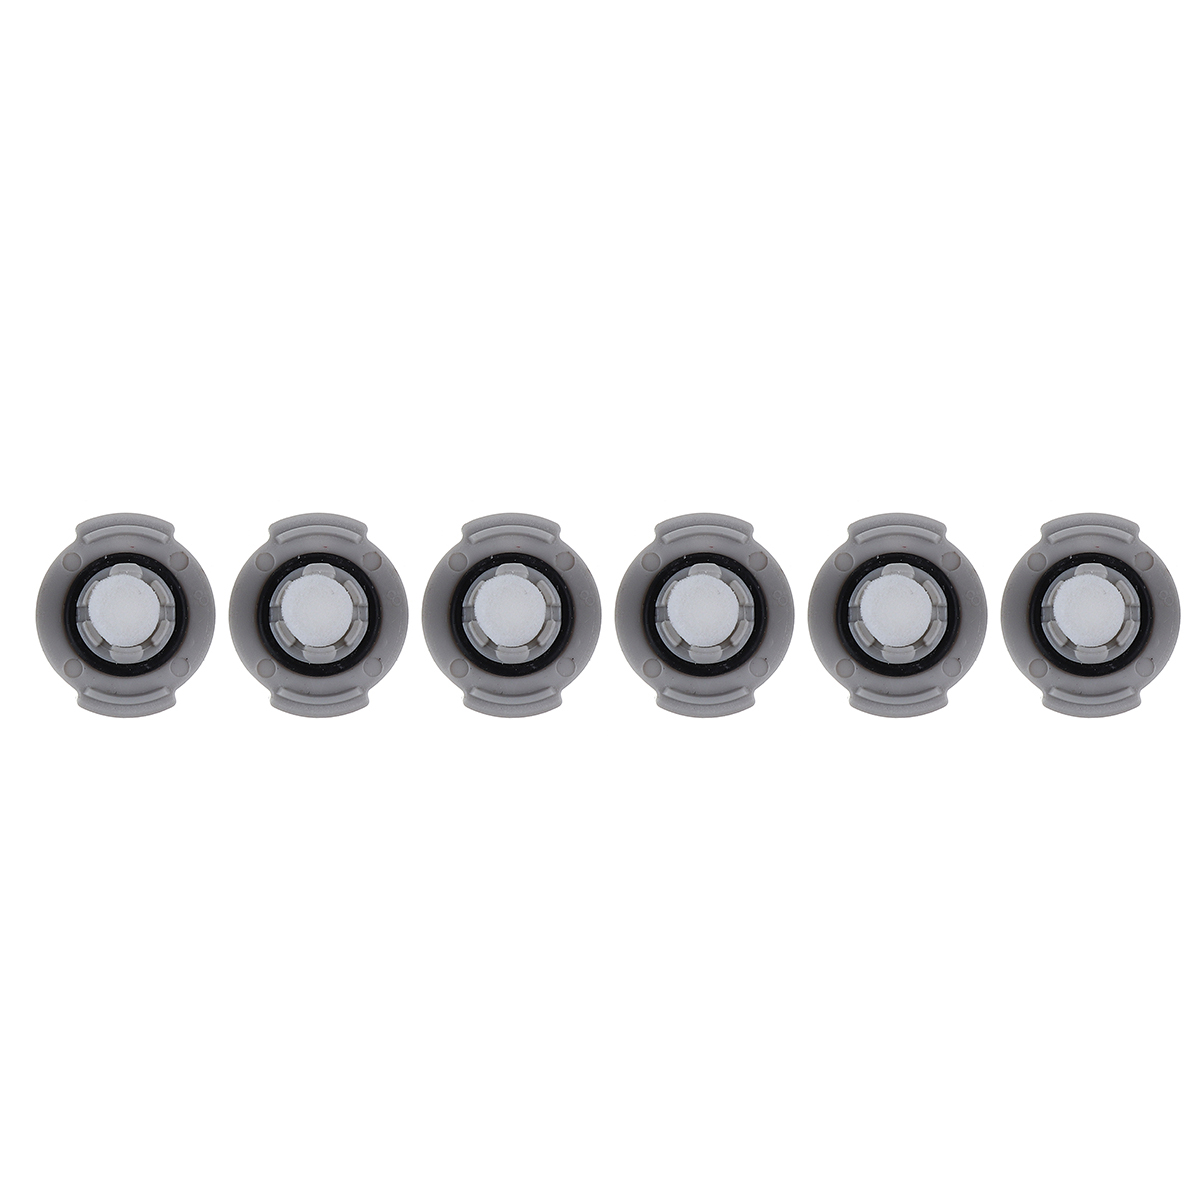 20pcs-Replacements-for-Xiaomi-Roborock-S6-S60-S65-S5-MAX-T6-Vacuum-Cleaner-Parts-Accessories-Main-Br-1756290-10